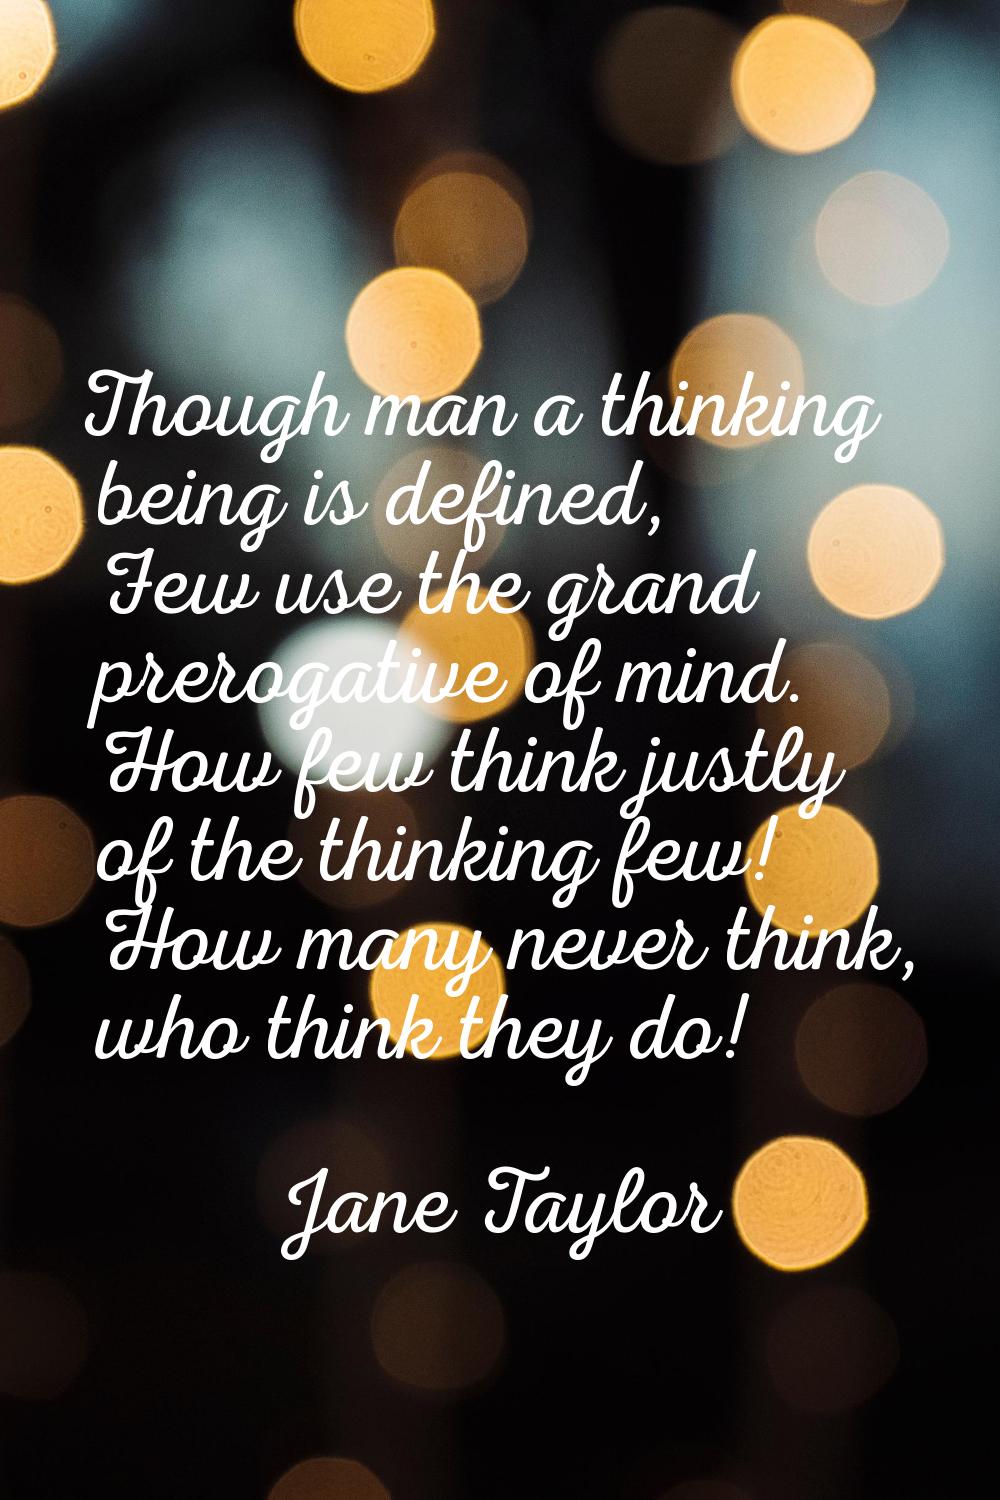 Though man a thinking being is defined, Few use the grand prerogative of mind. How few think justly